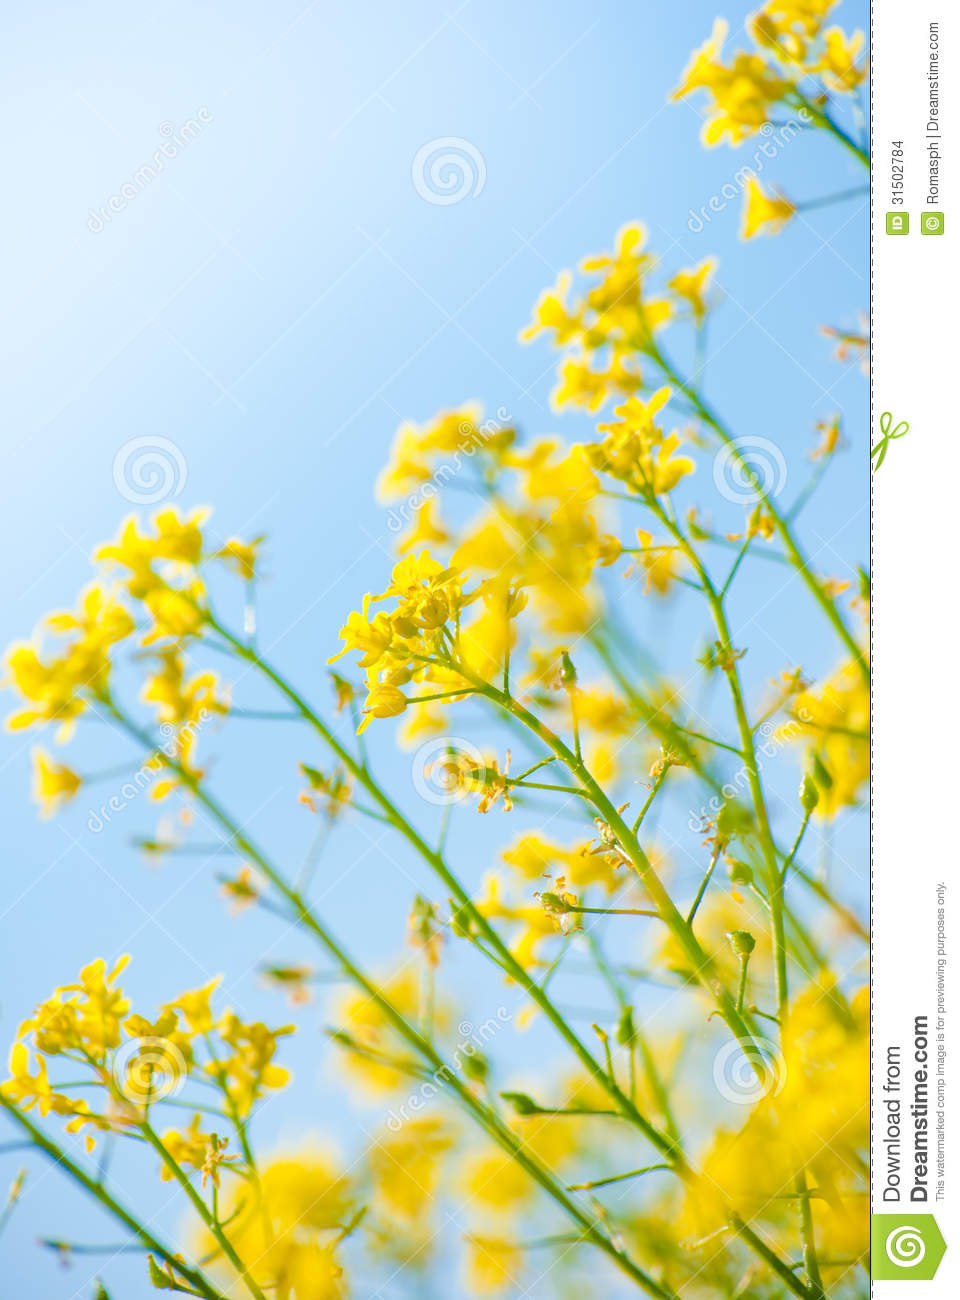 Yellow Rapeseed Oil  Canola  Stock Images   Image  31502784